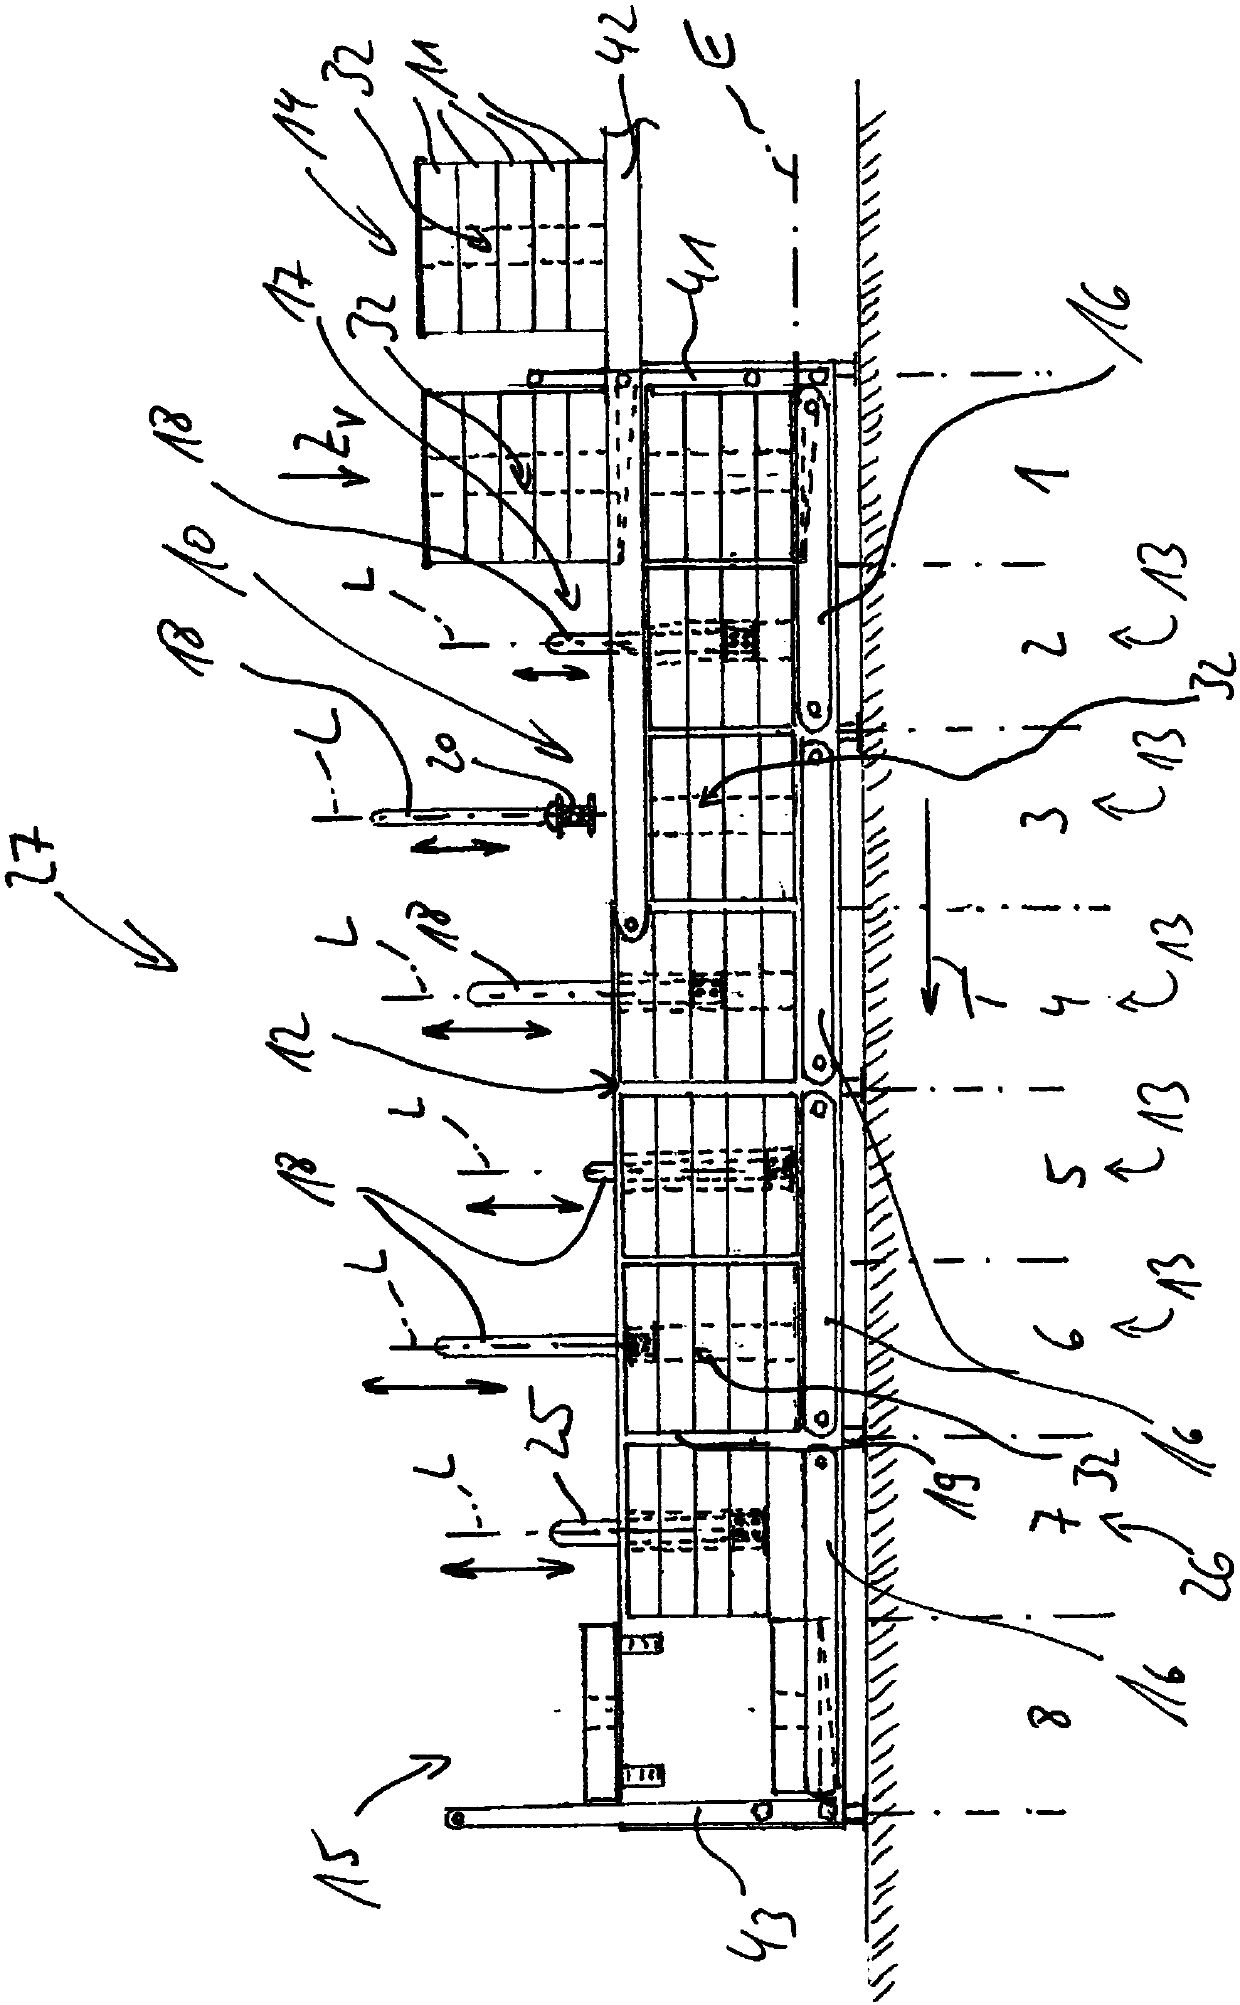 Device, assembly, and method for stunning poultry